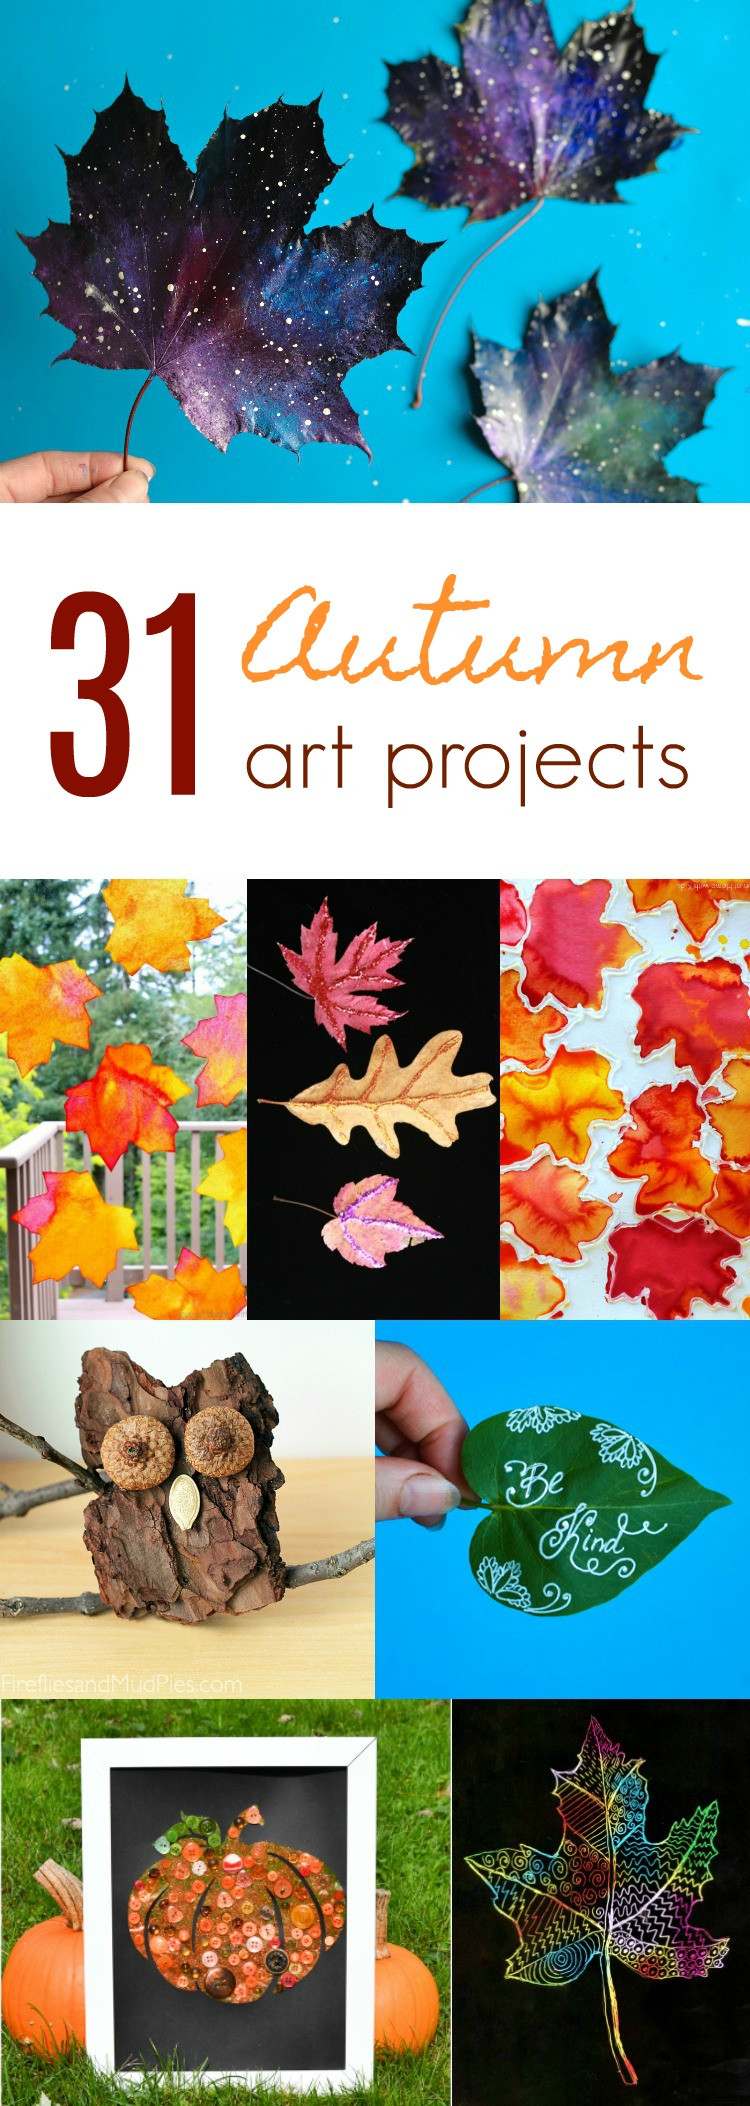 Fall Art Projects For Kids
 31 Art Projects for Children to Make in the Fall